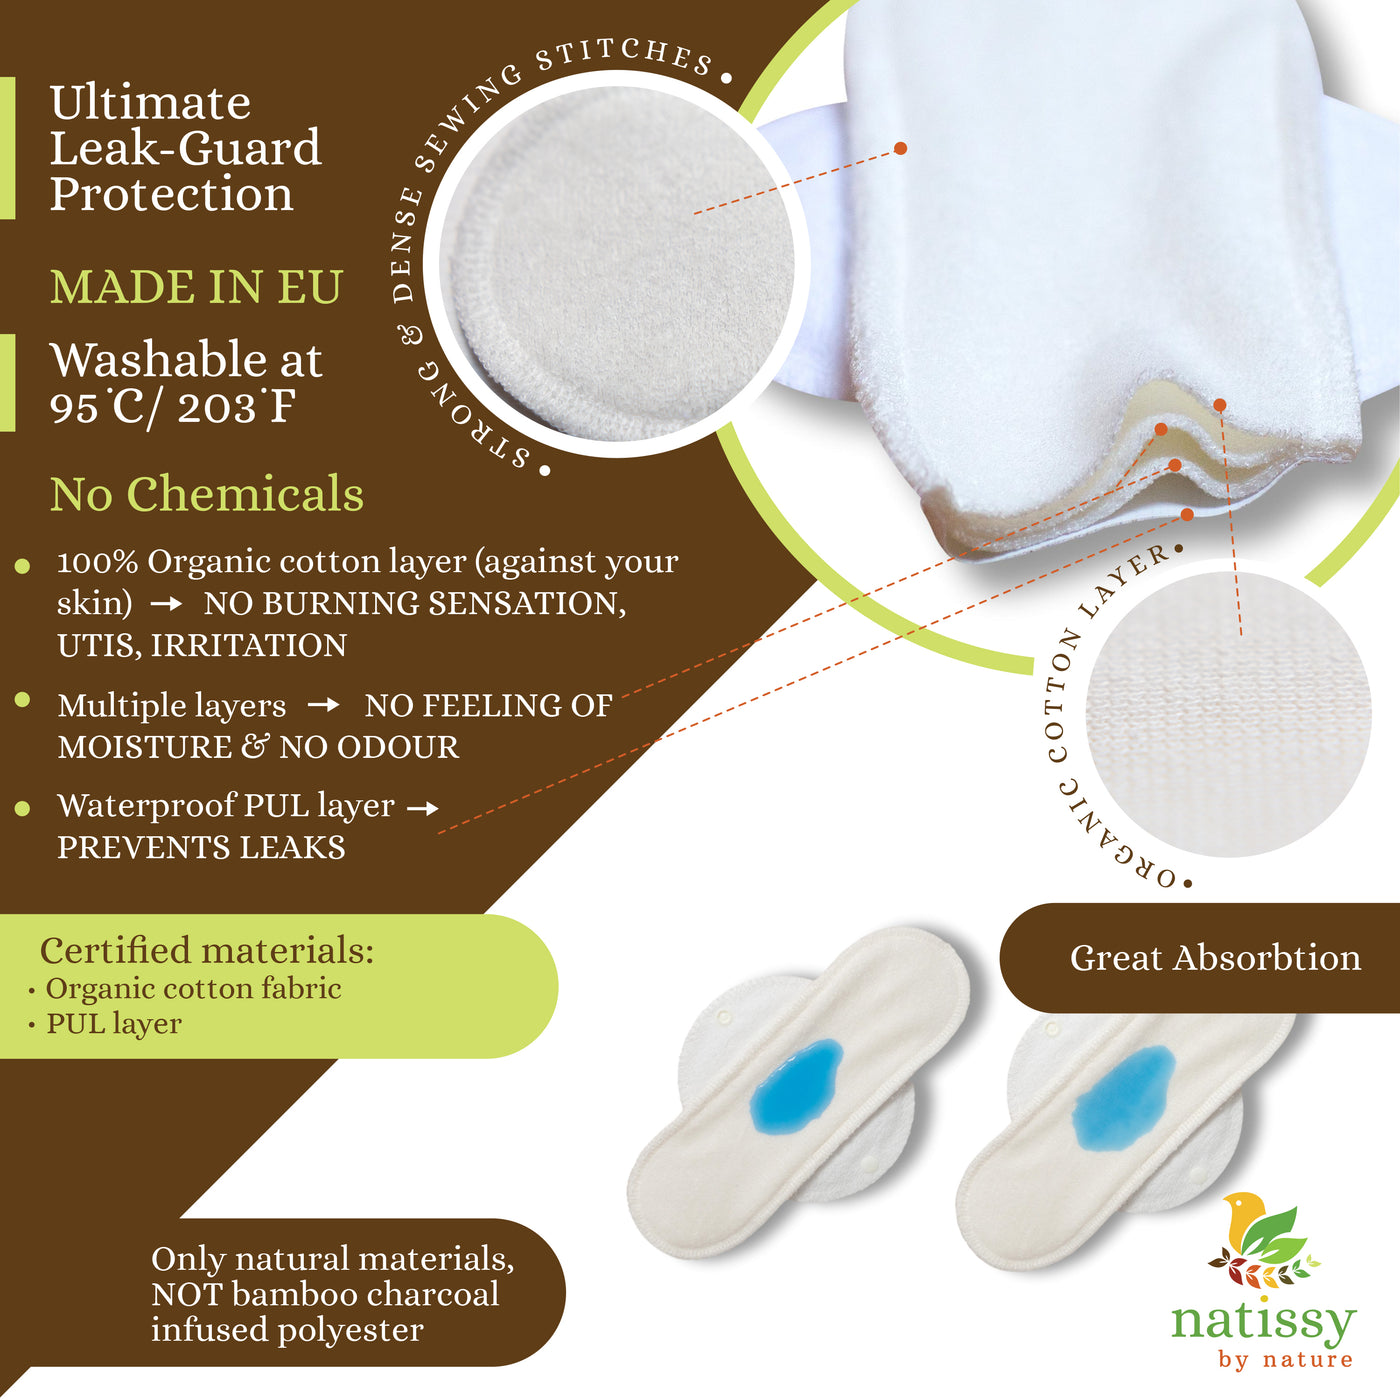 Reusable Menstrual Pads, 6-Pack Organic Cotton Reusable Sanitary Towels with Wings (size L & XL), MADE IN EU, for Menstrual Periods and Incontinence; EXTRA Double Wet Bag with Strap; Reusable Incontinence Towel